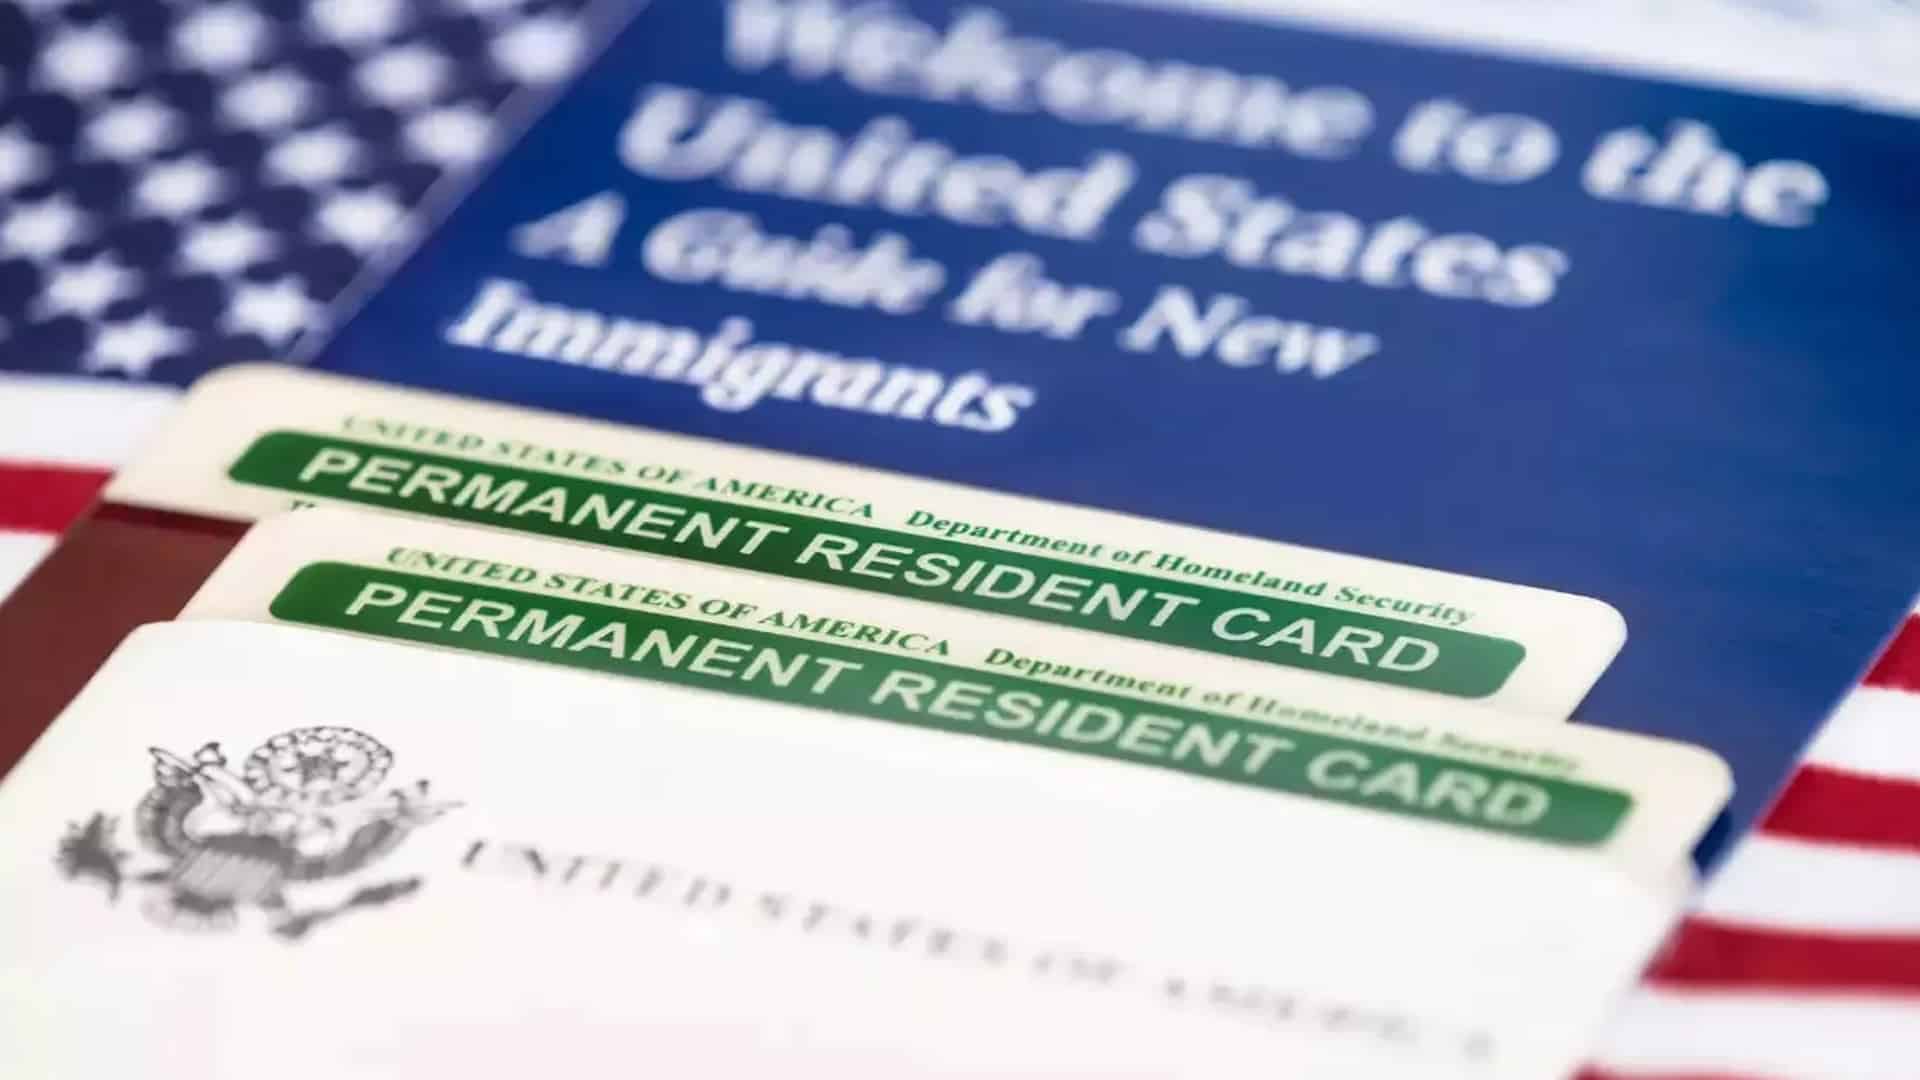 US presidential advisory panel approves recapturing over 2laks unused green cards for family and employment categories from 1992